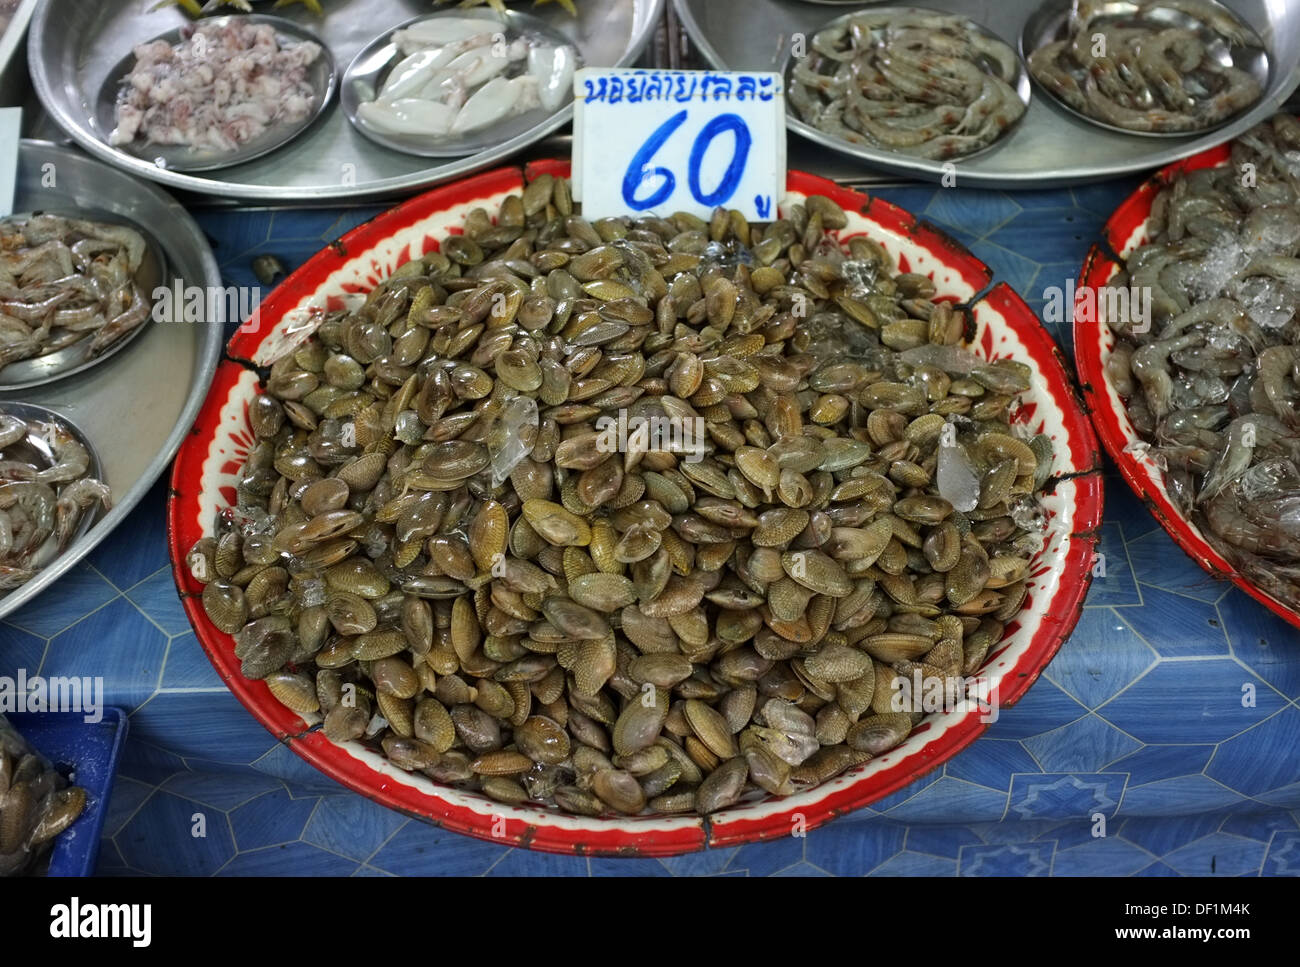 Fresh clams for sale at a market in Bangkok Stock Photo